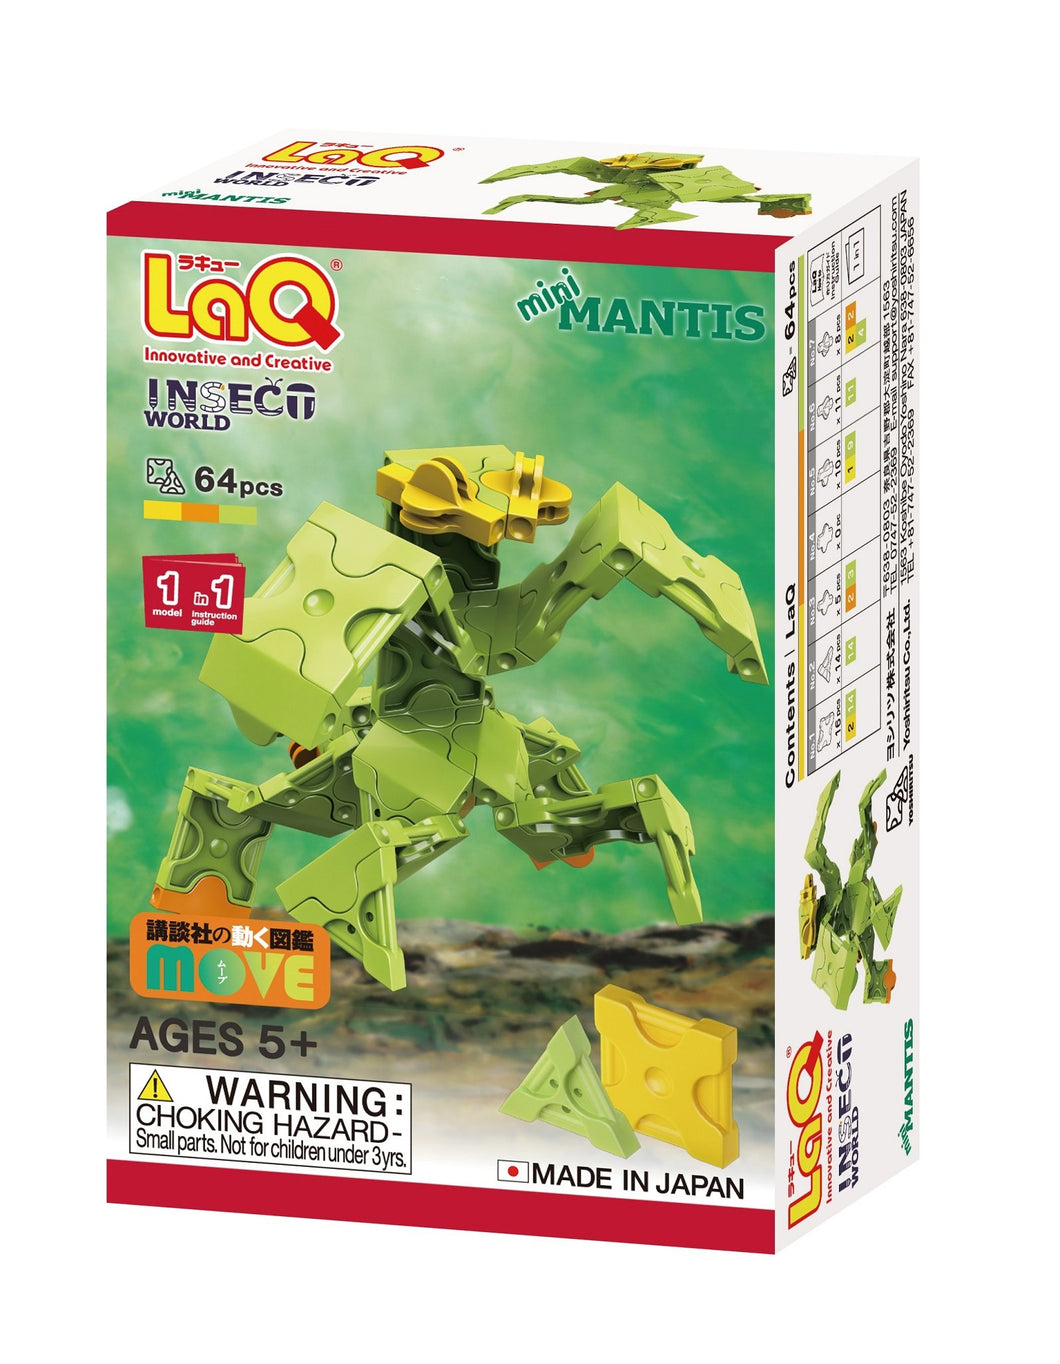 Package front view featured in the LaQ insect world mini mantis set